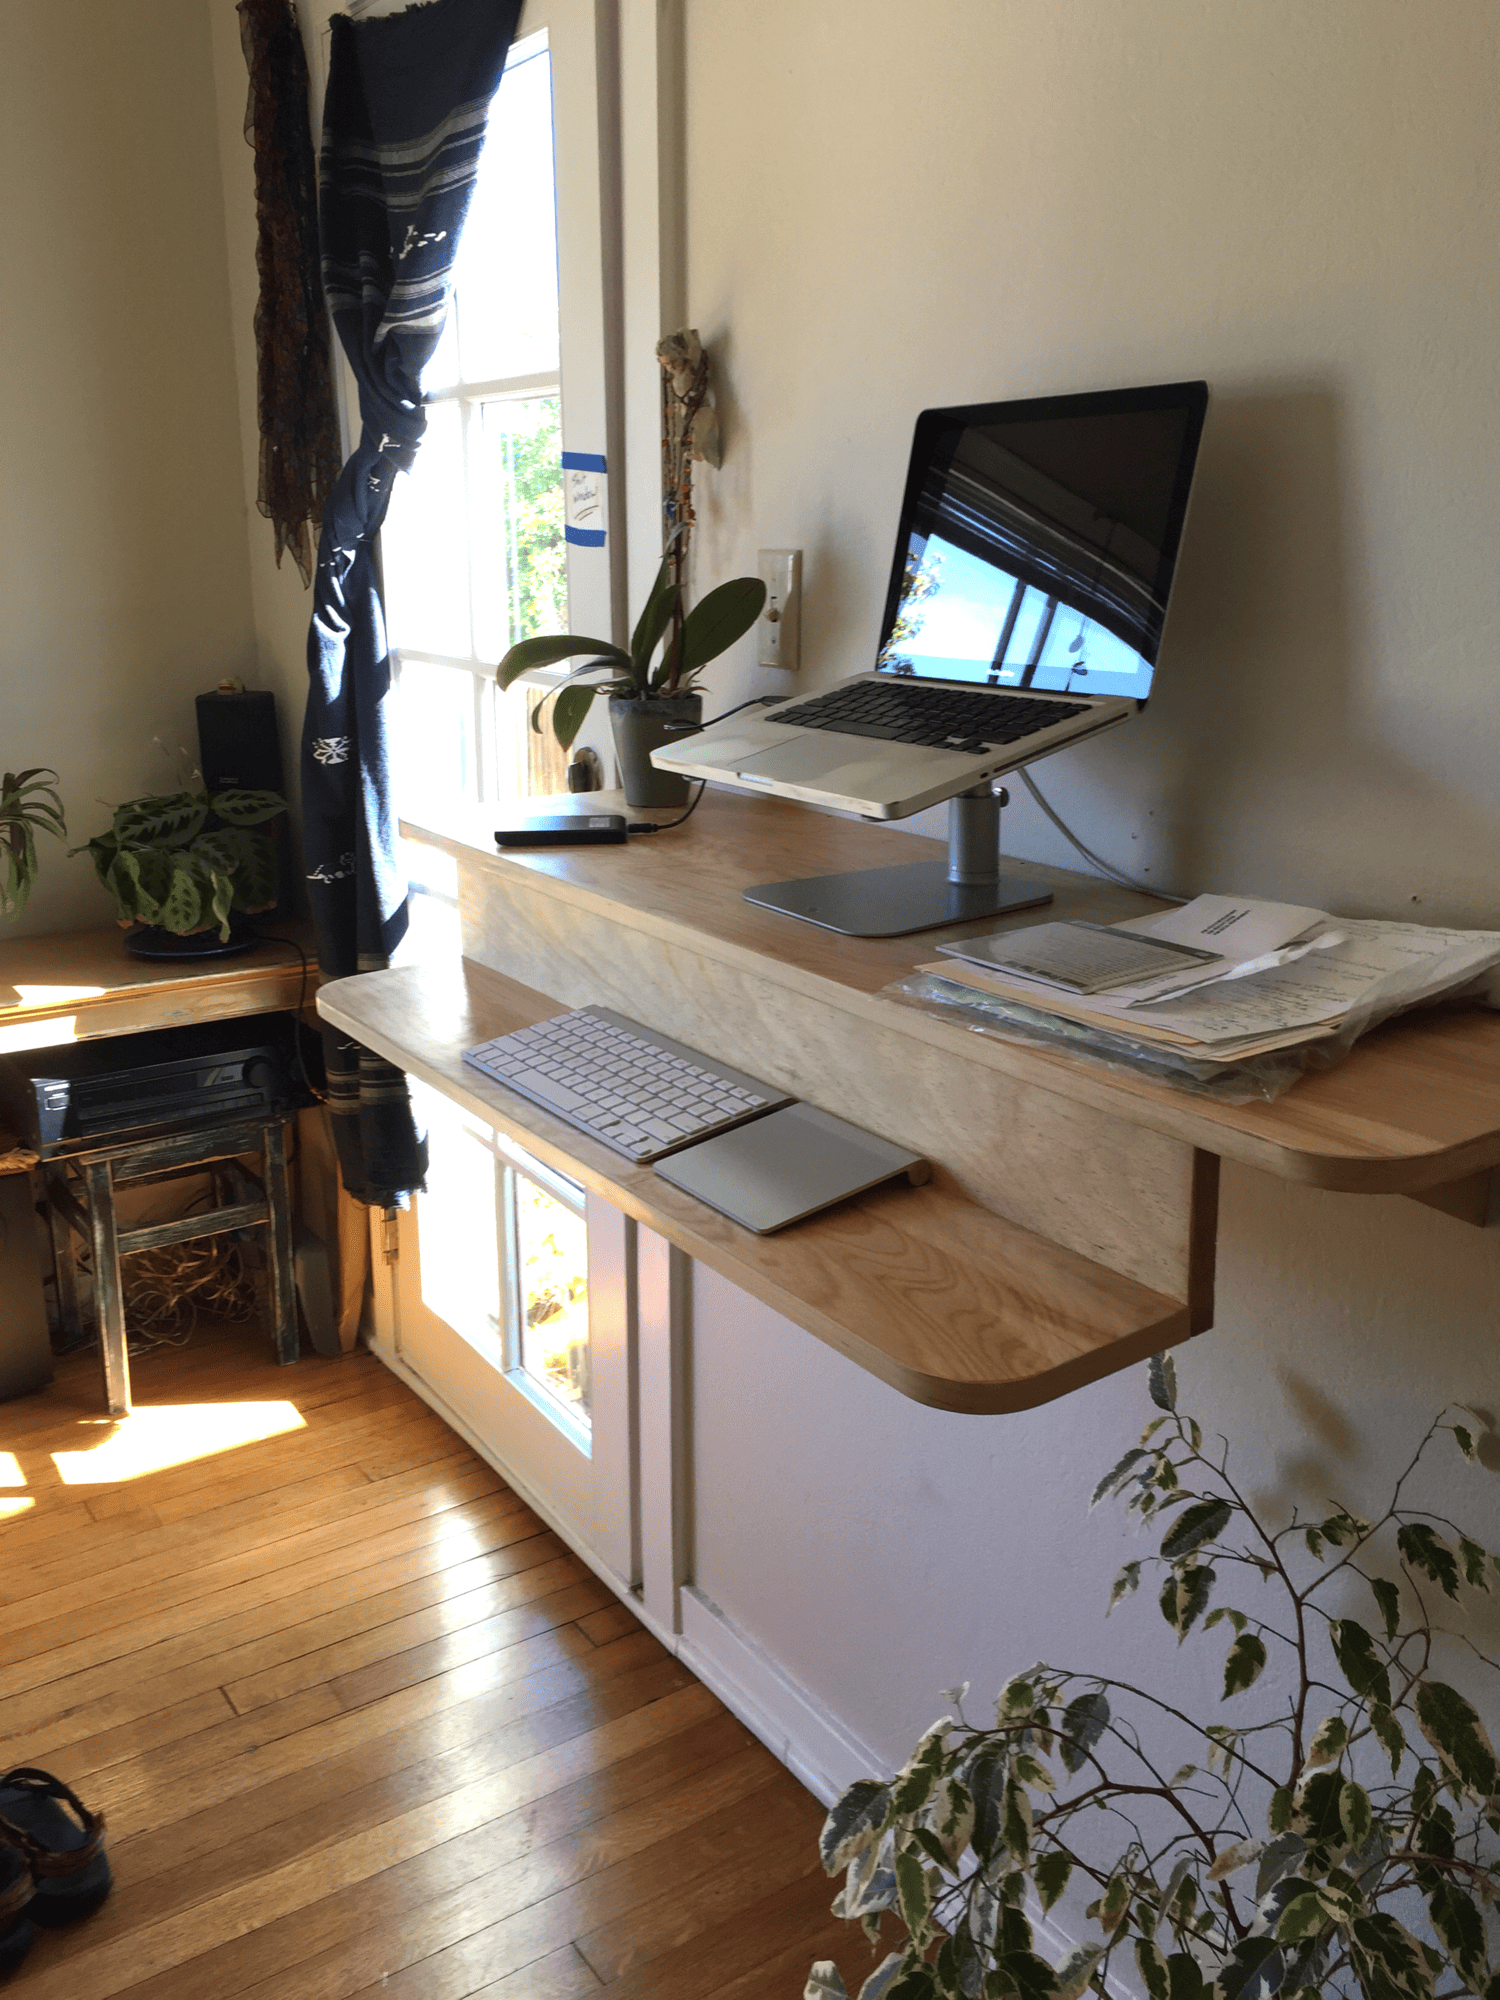 Home office workspace idea featuring a wall mounted desk